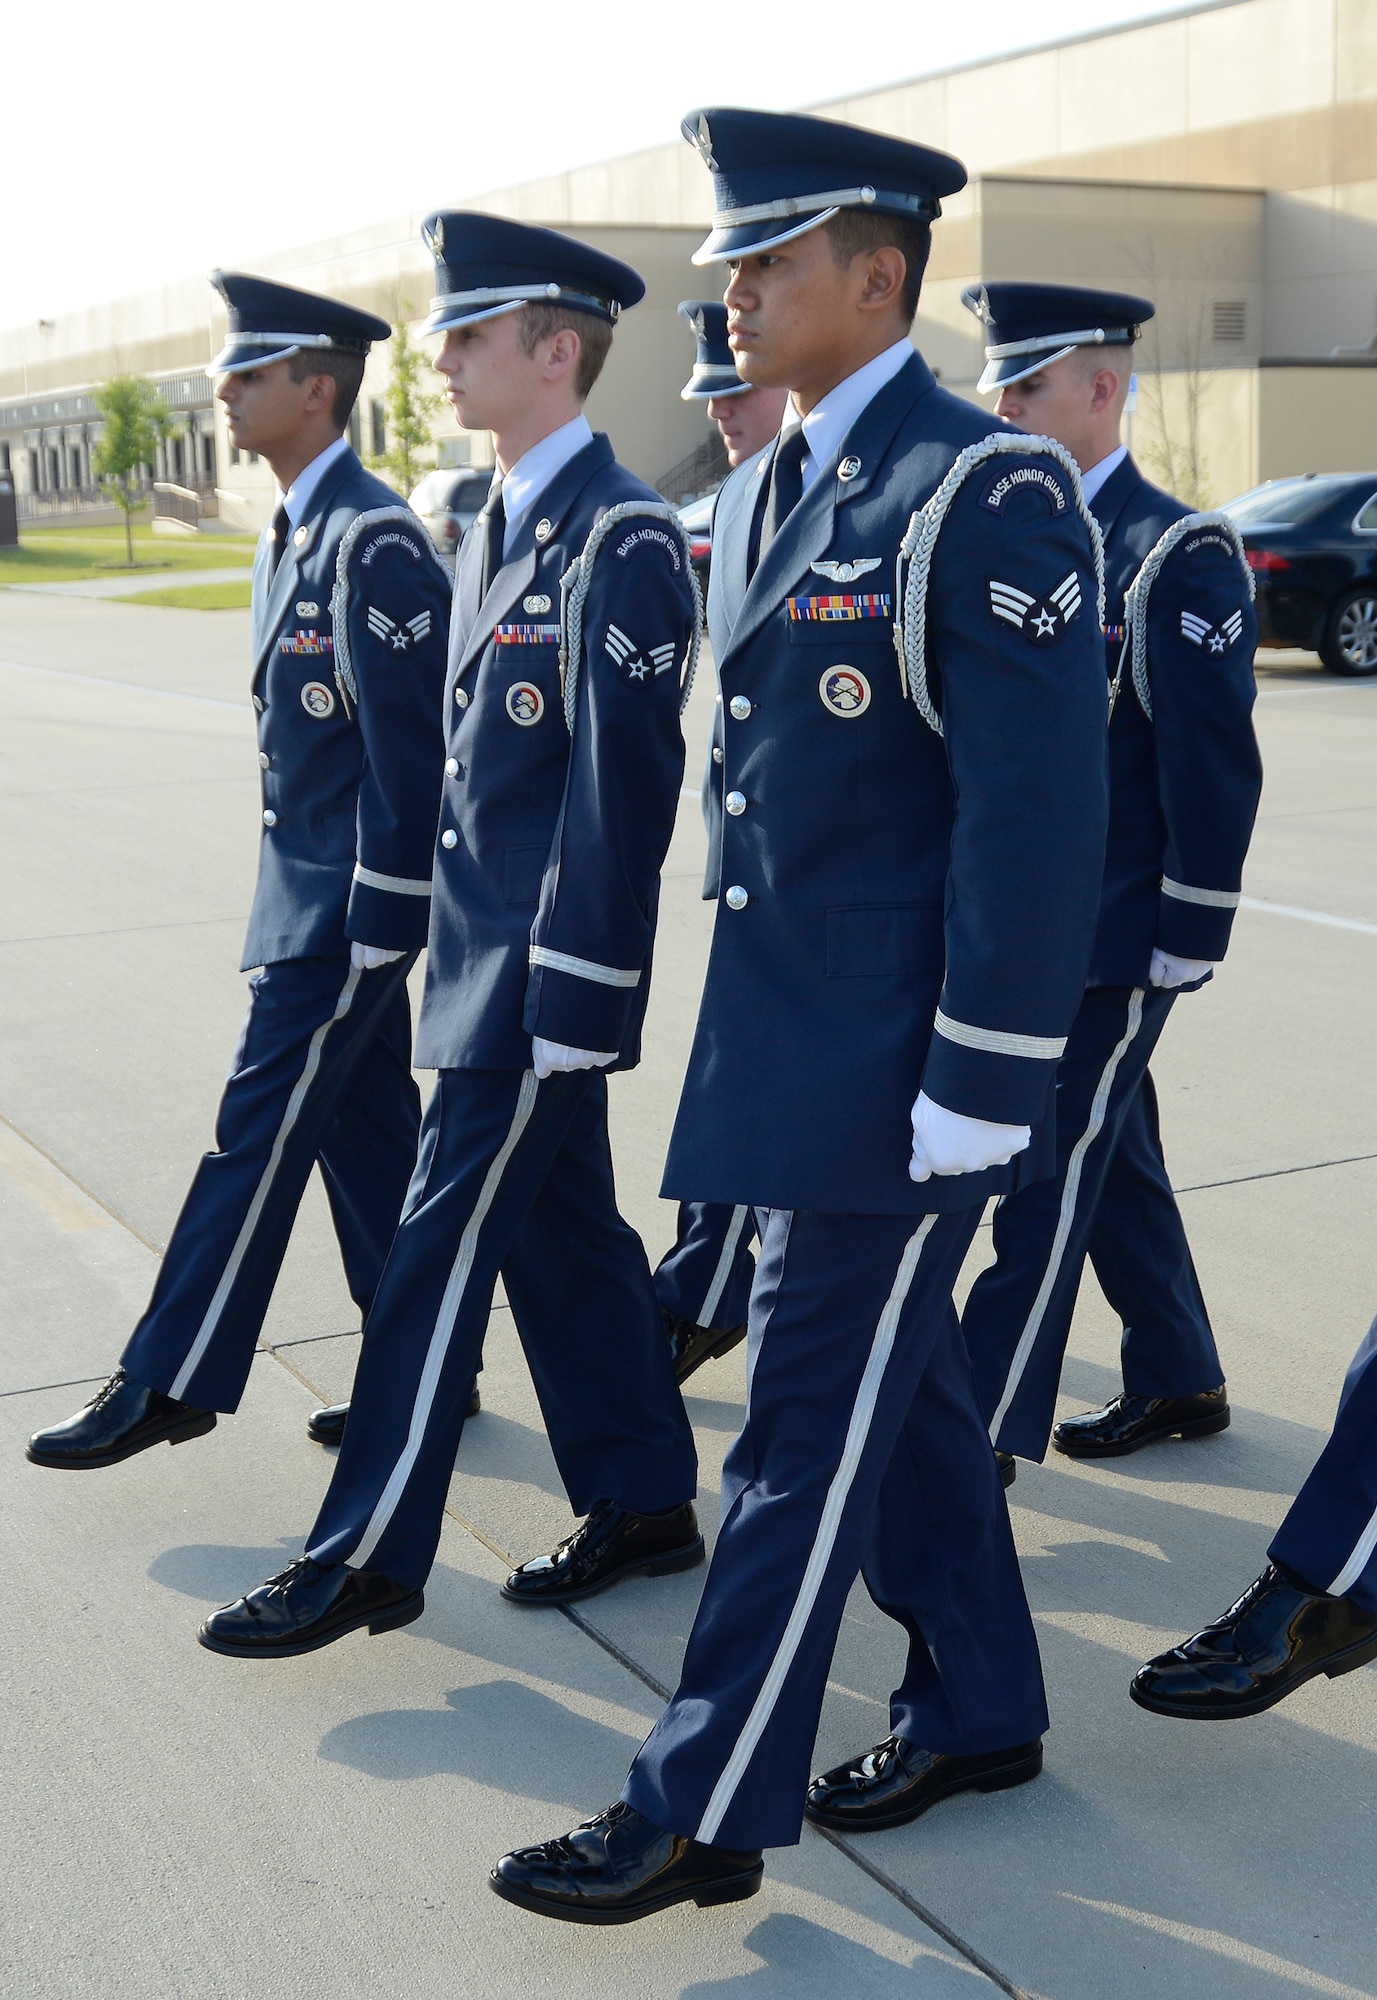 Honor Guard members go through frequent inspections to ensure their uniforms are perfect. (U.S. Air Force photo by Ed Aspera)